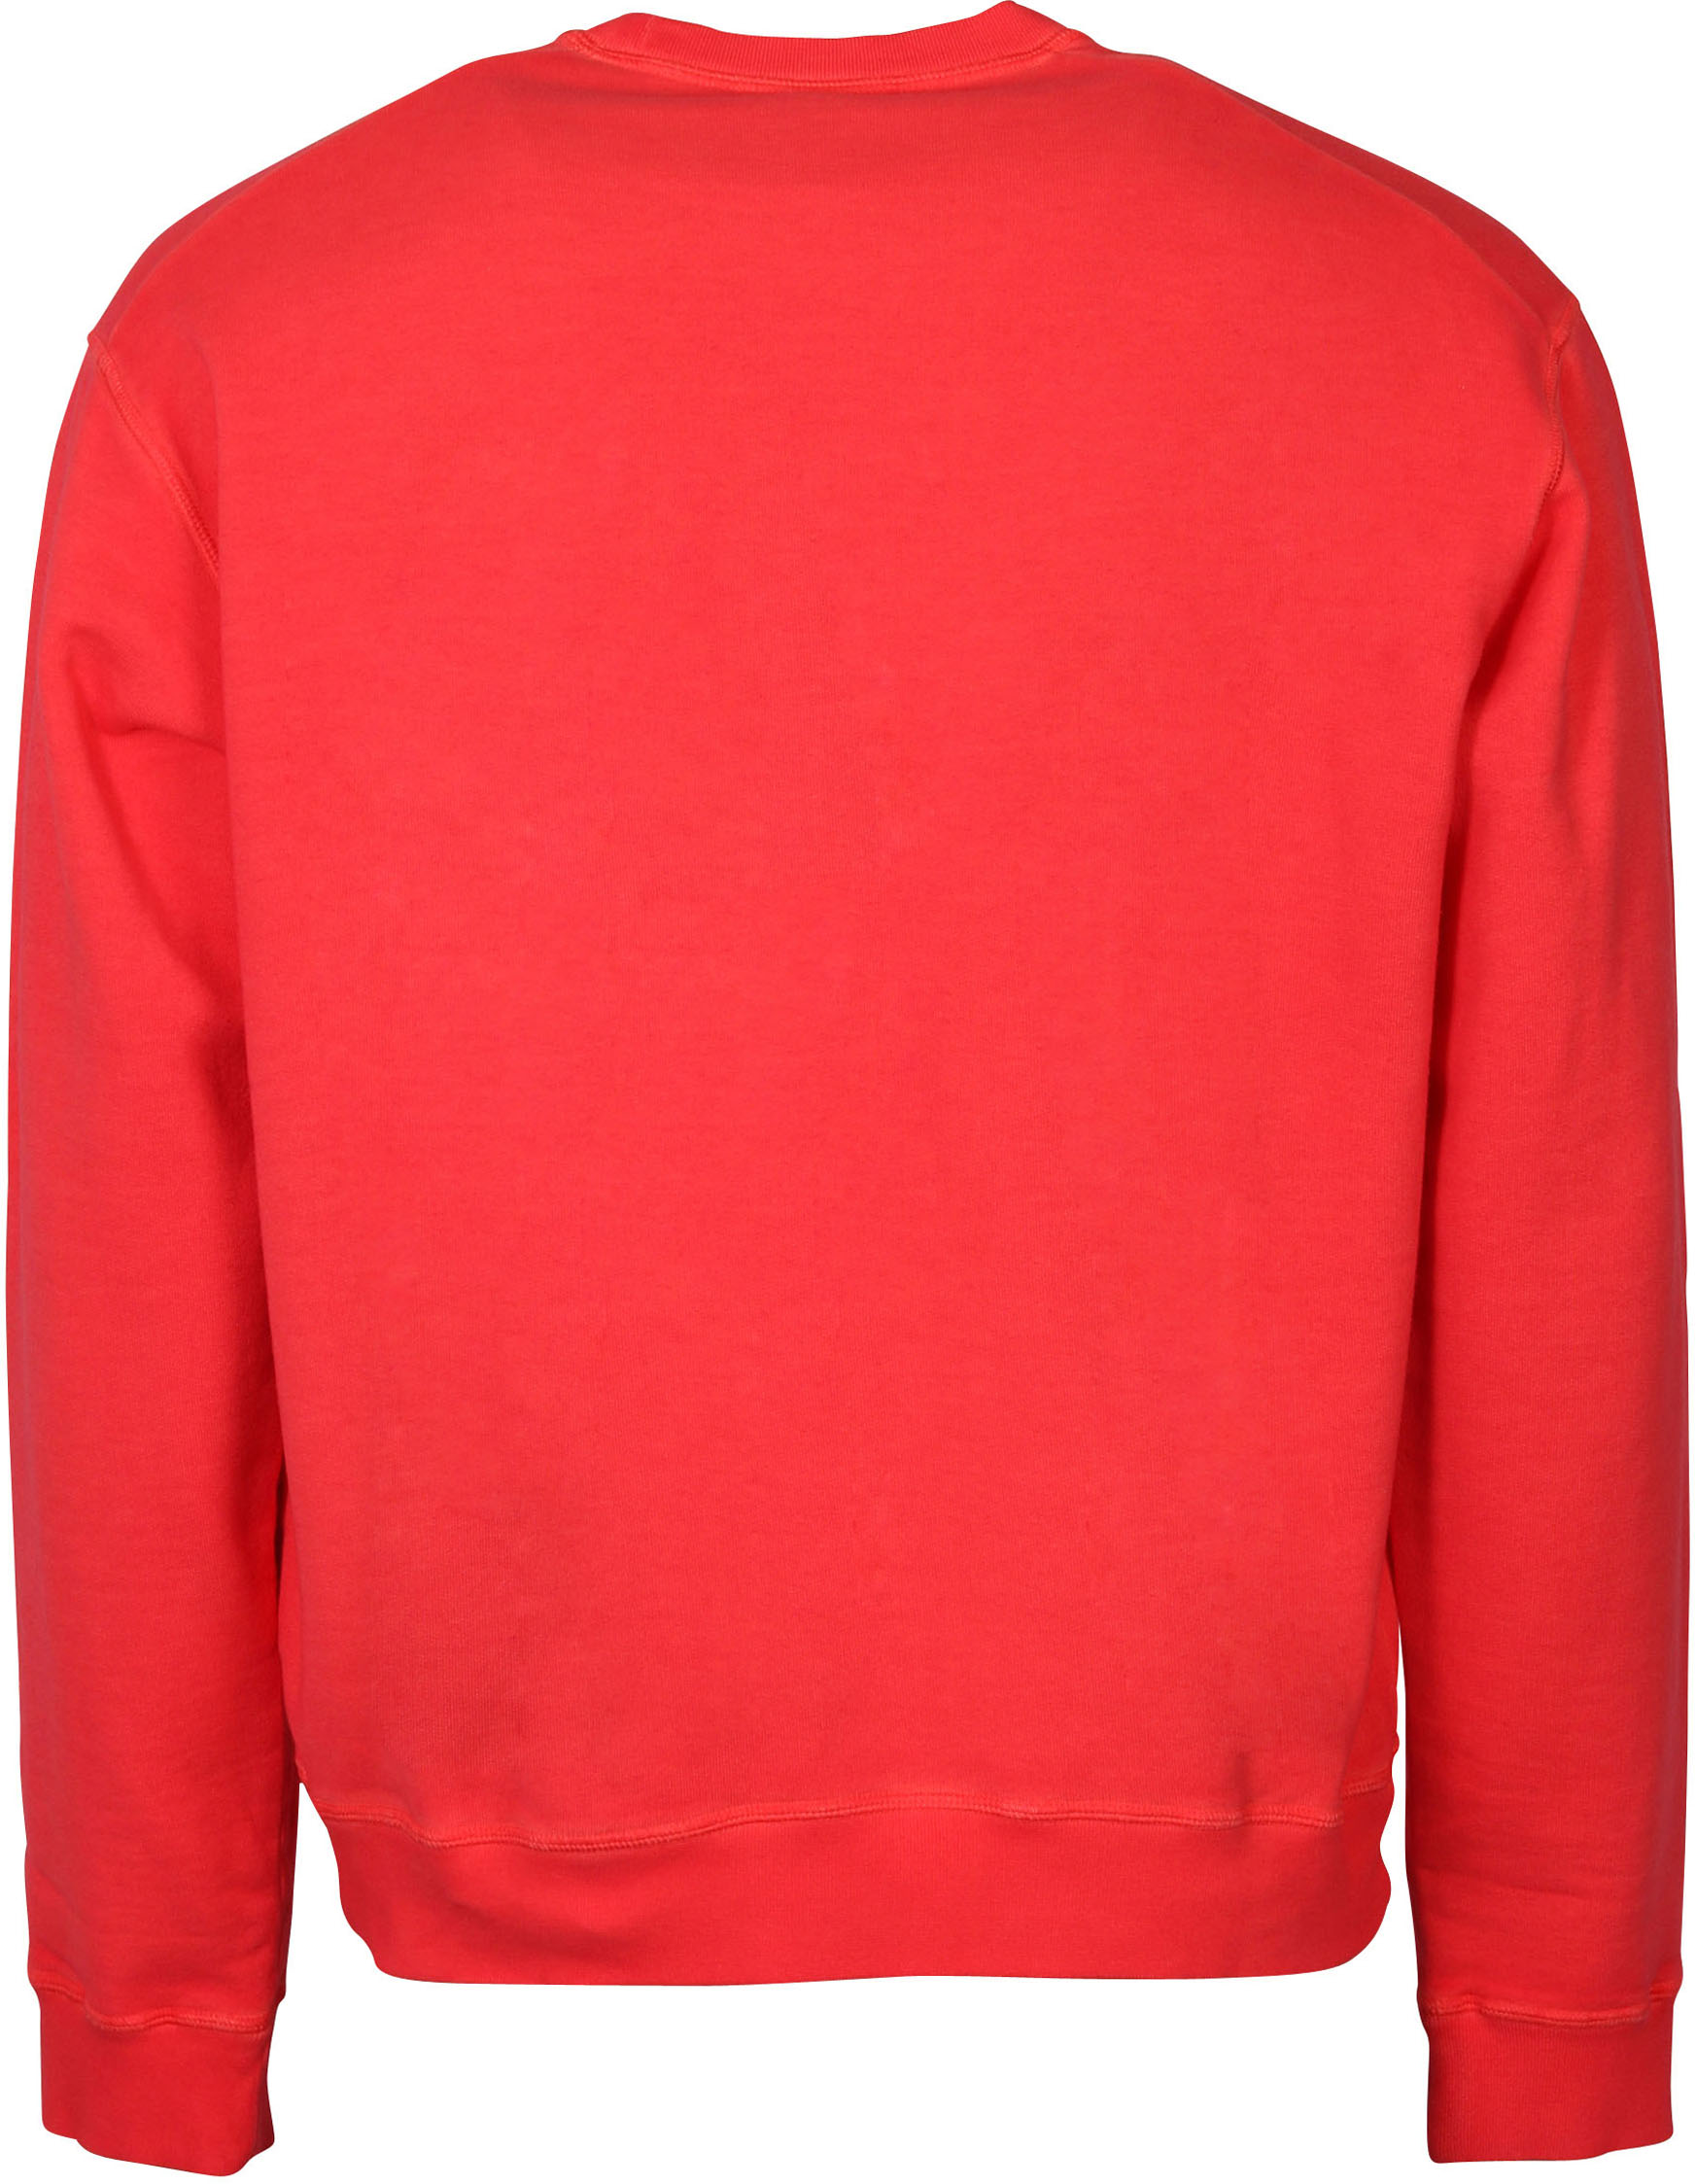 Dsquared Sweatshirt Coral Red Printed XXL